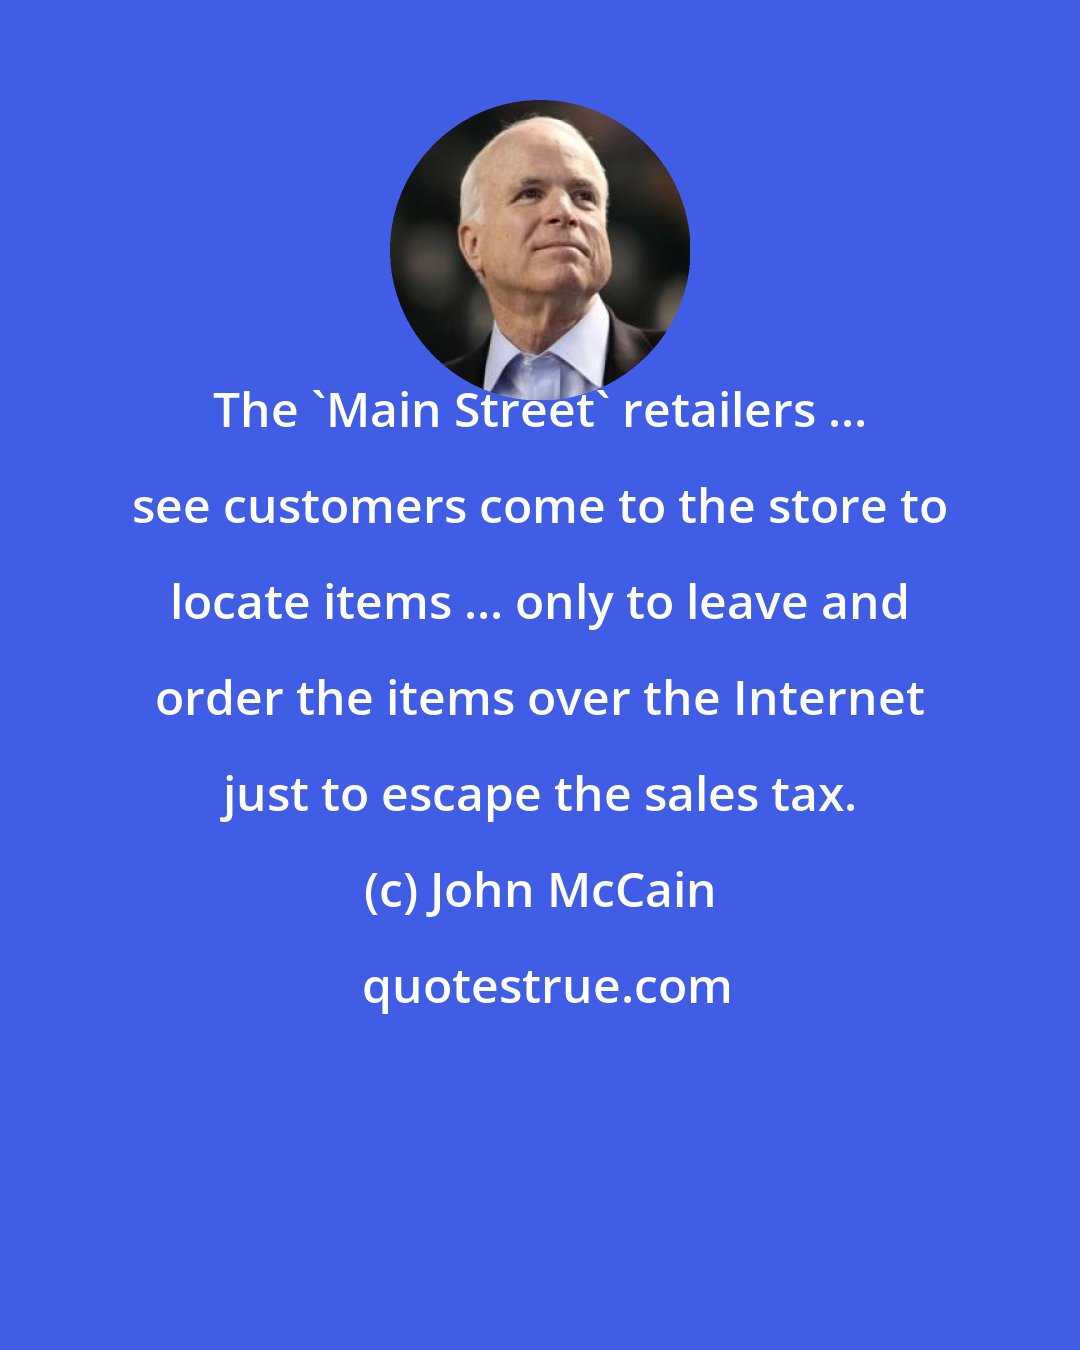 John McCain: The 'Main Street' retailers ... see customers come to the store to locate items ... only to leave and order the items over the Internet just to escape the sales tax.